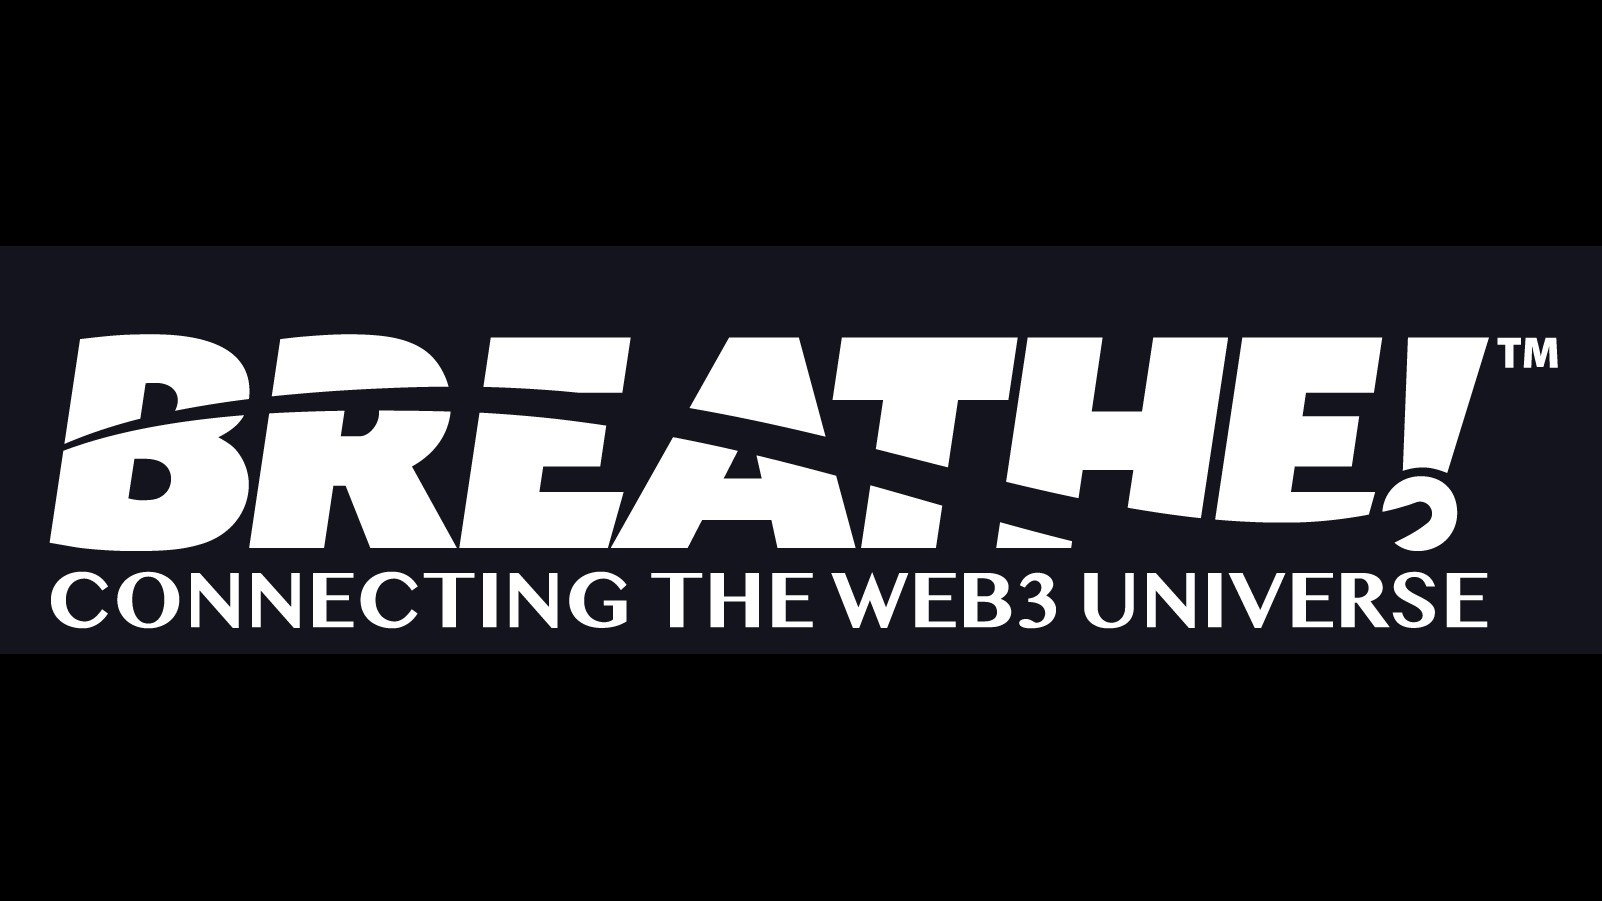 Breathe! Web3 Convention Announces their ISO Certification Plans.